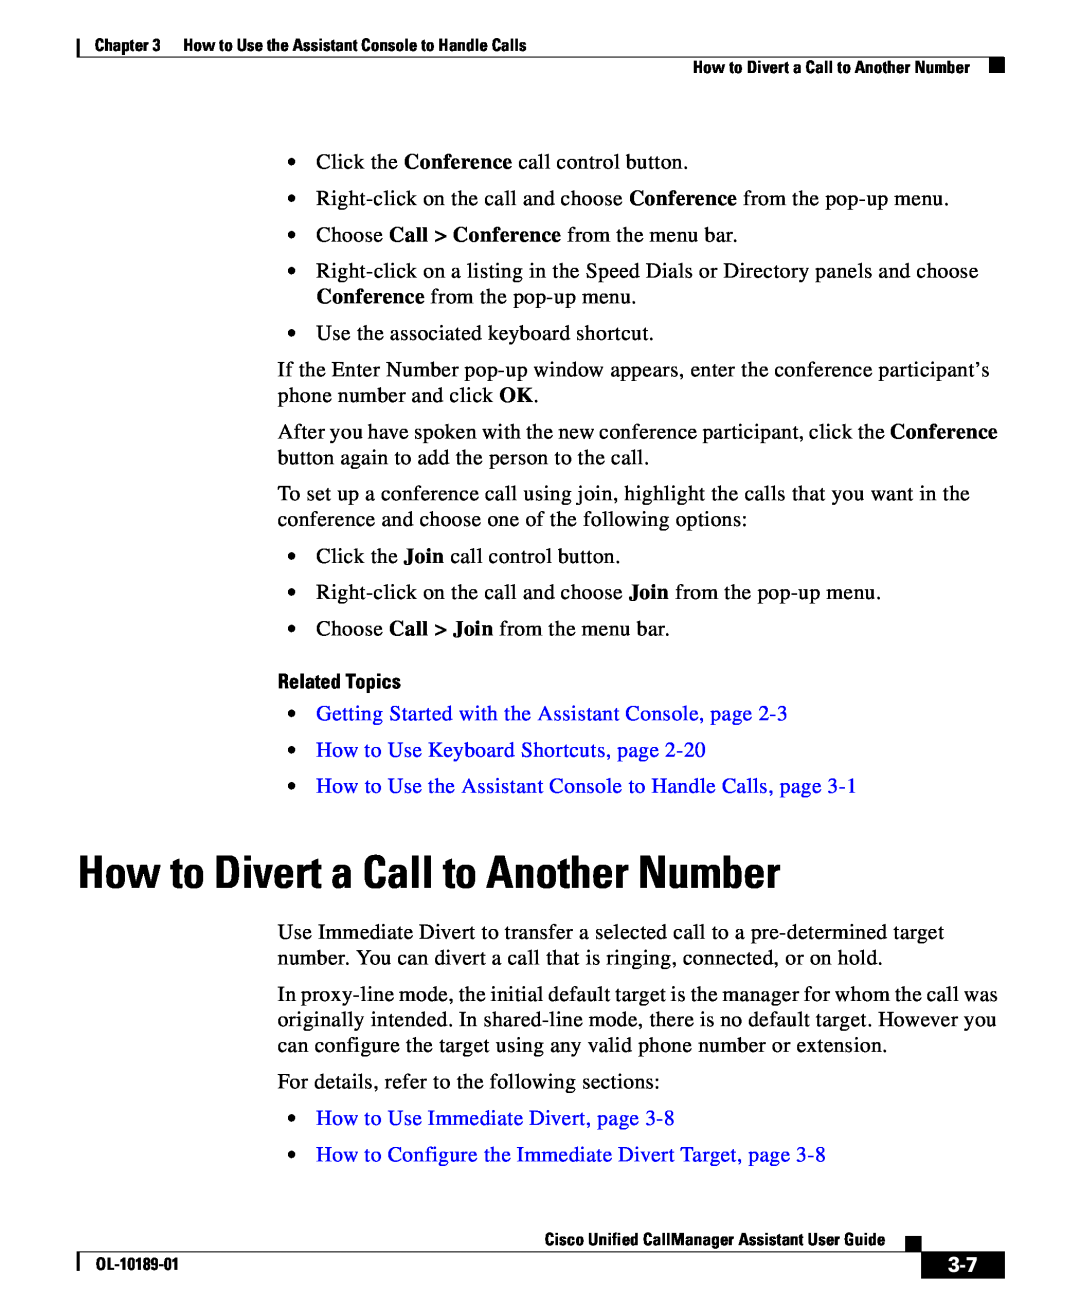 Cisco Systems OL-10189-01 manual How to Divert a Call to Another Number, How to Use Immediate Divert, page, Related Topics 